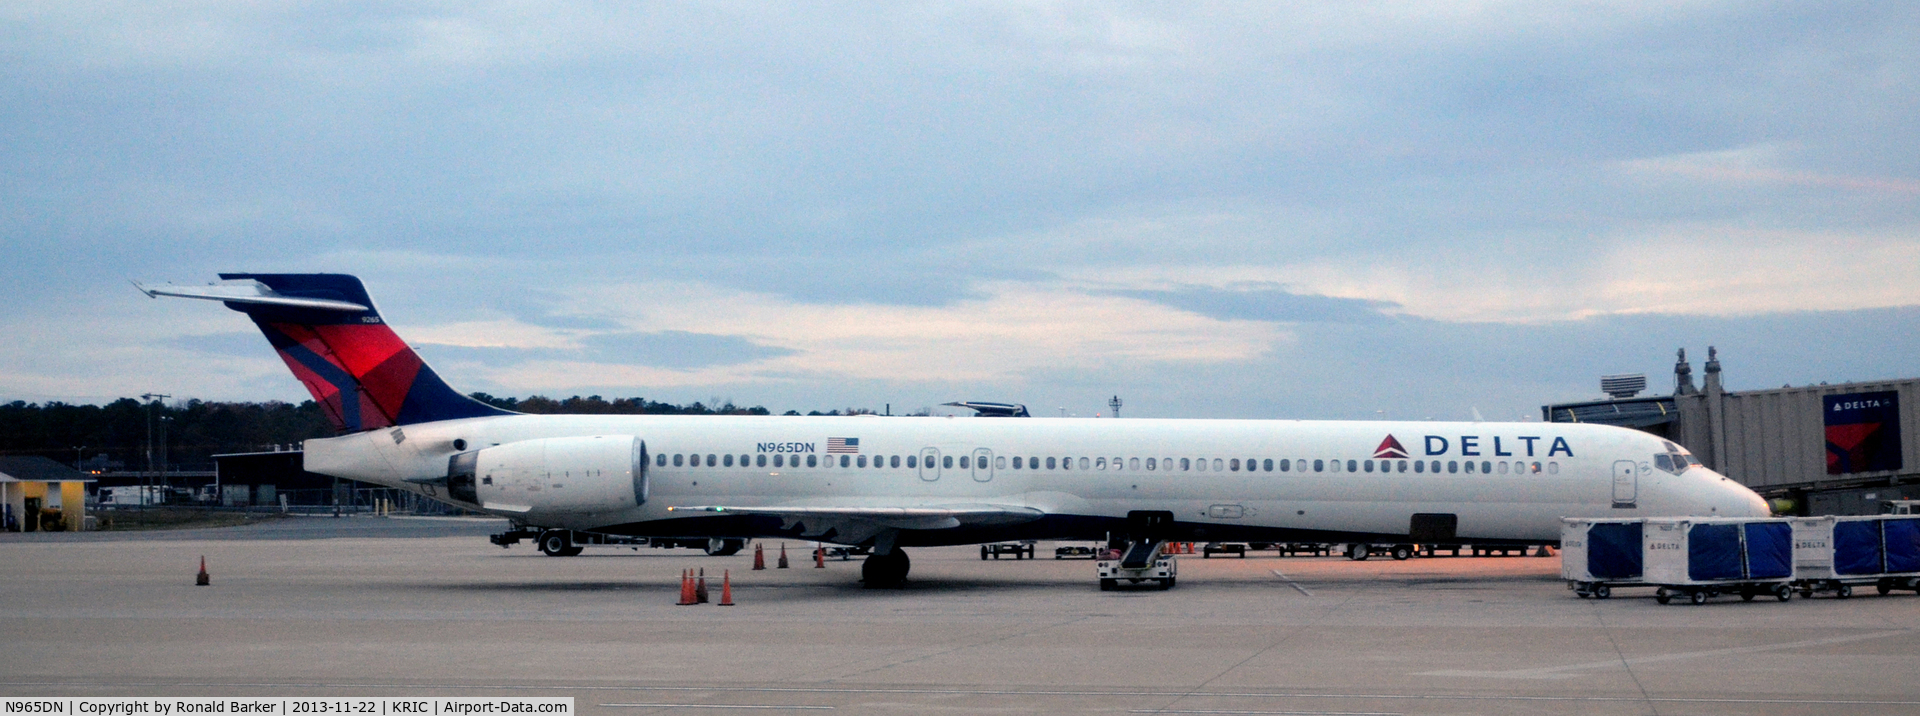 N965DN, 2001 McDonnell Douglas MD-90-30 C/N 60002, At the gate RIC